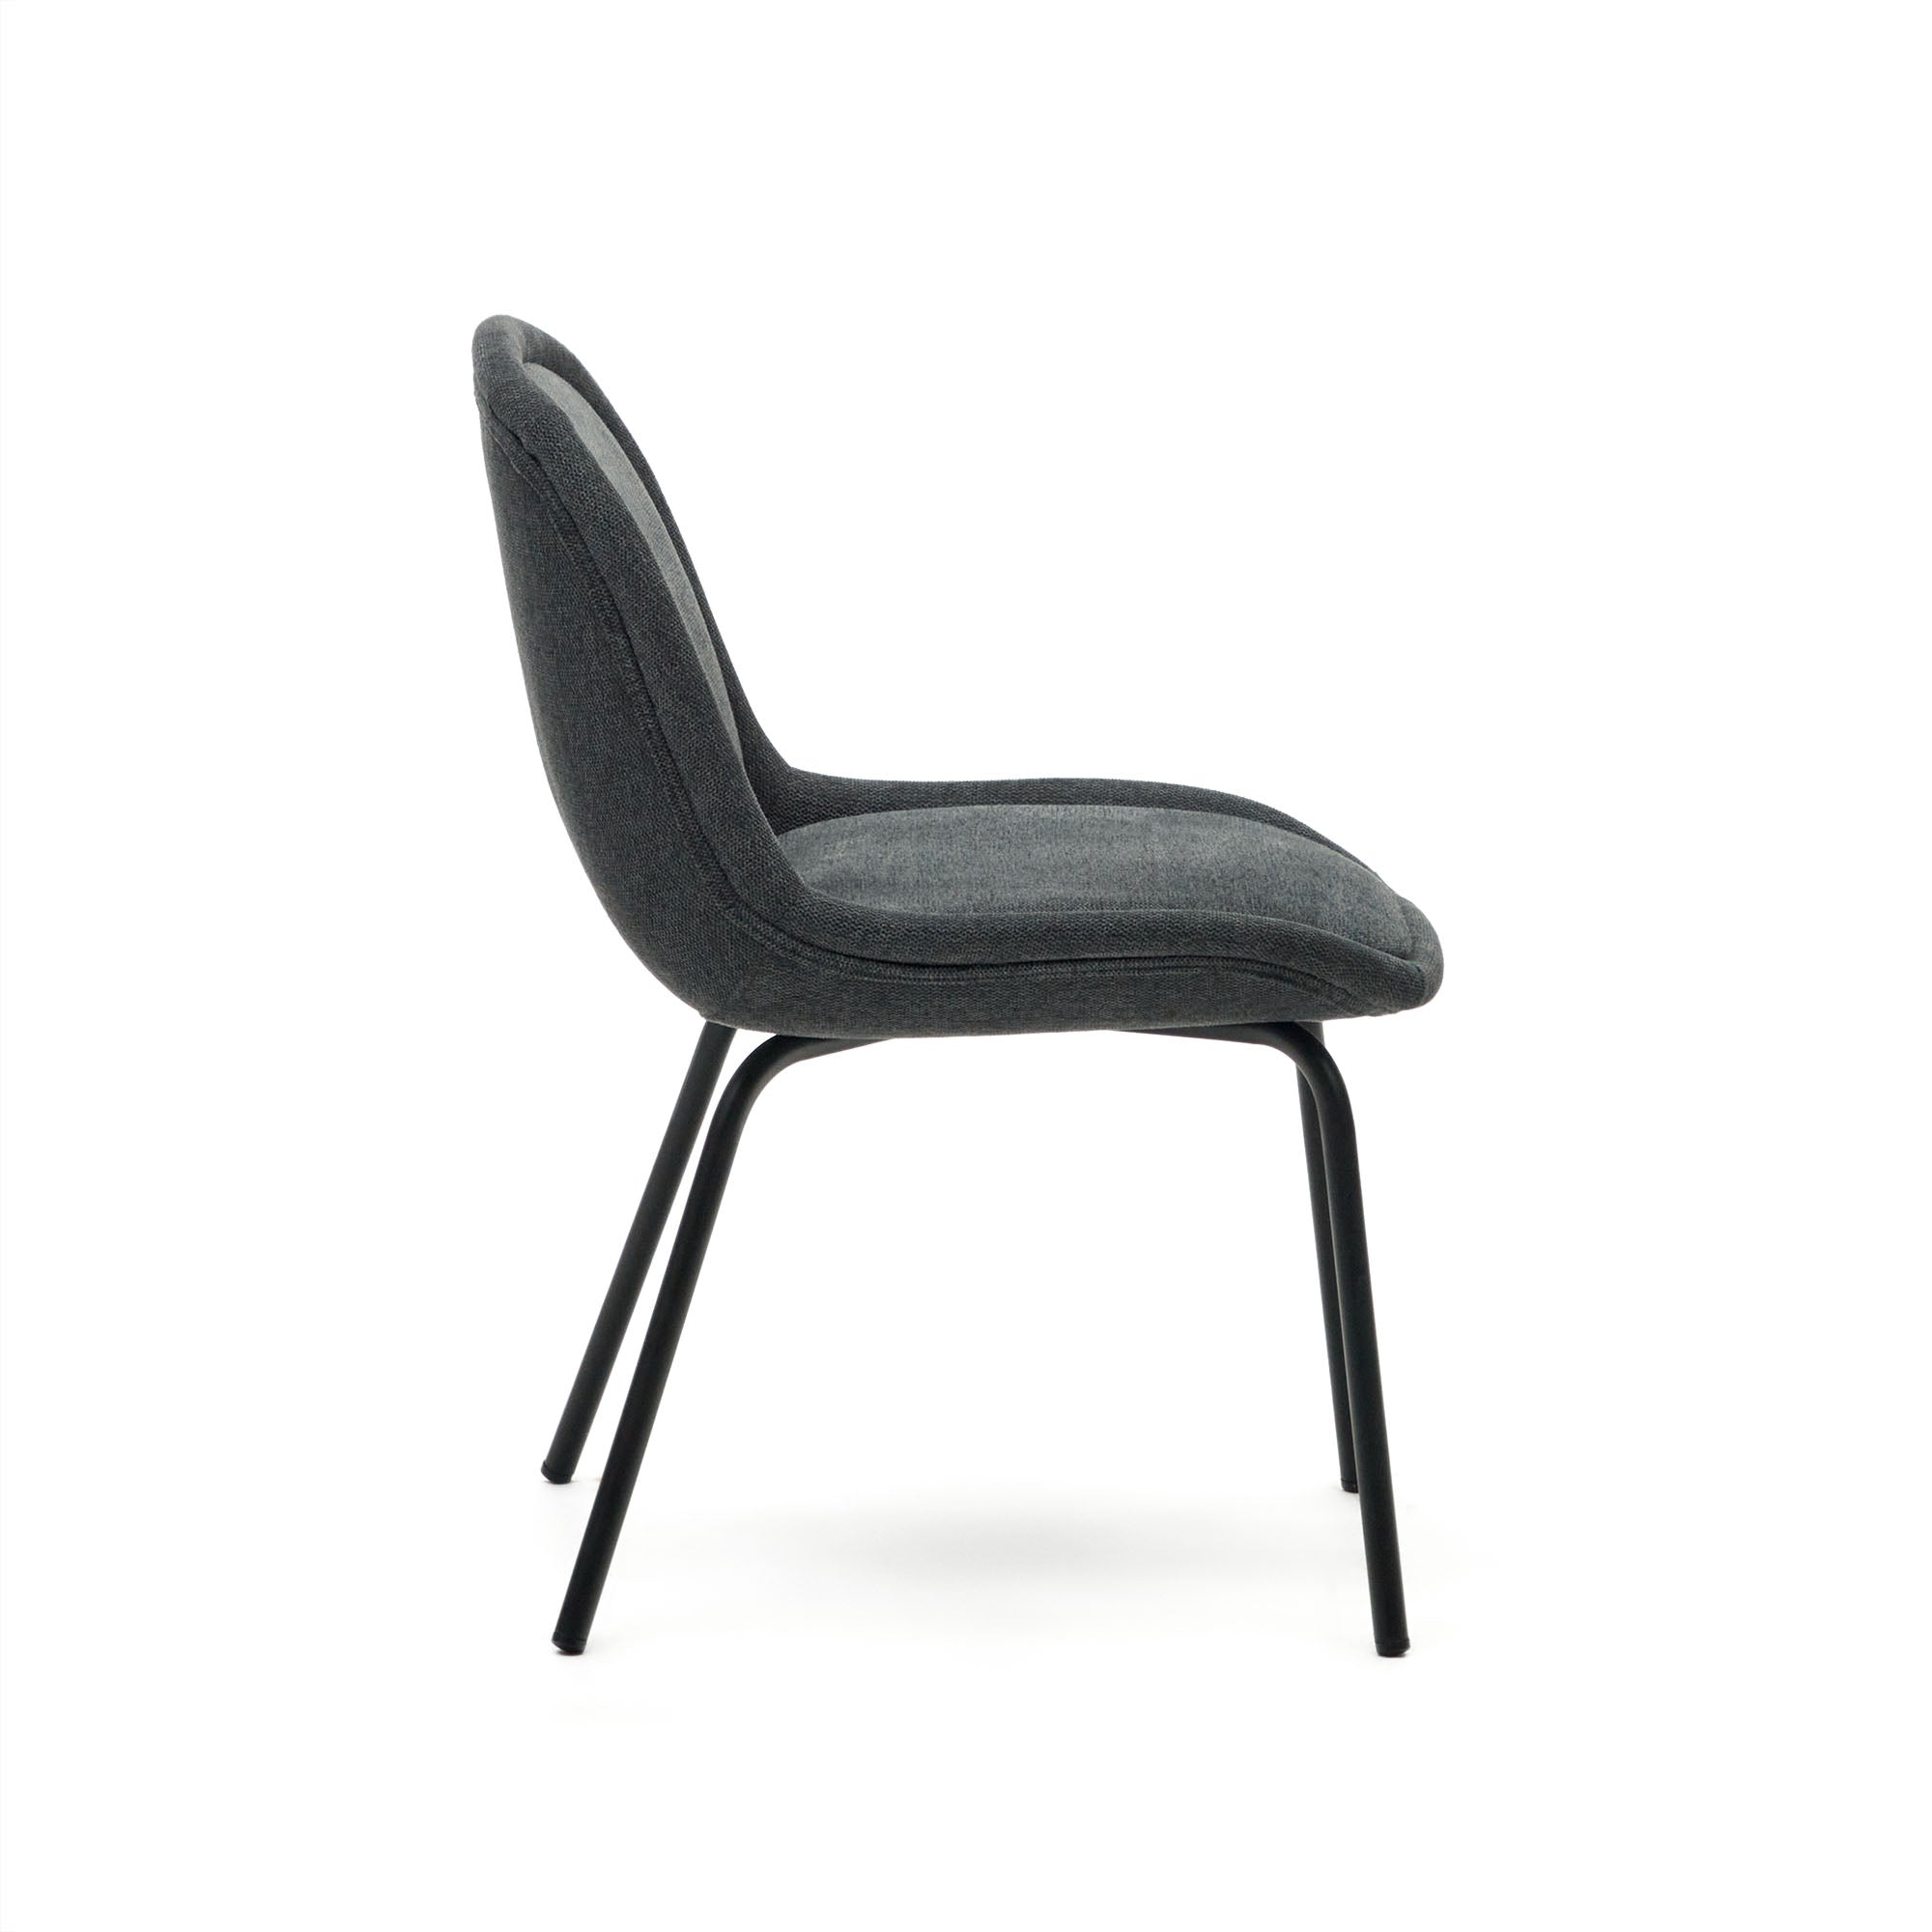 Aimin chair in grey chenille and steel legs with a matte black painted finish